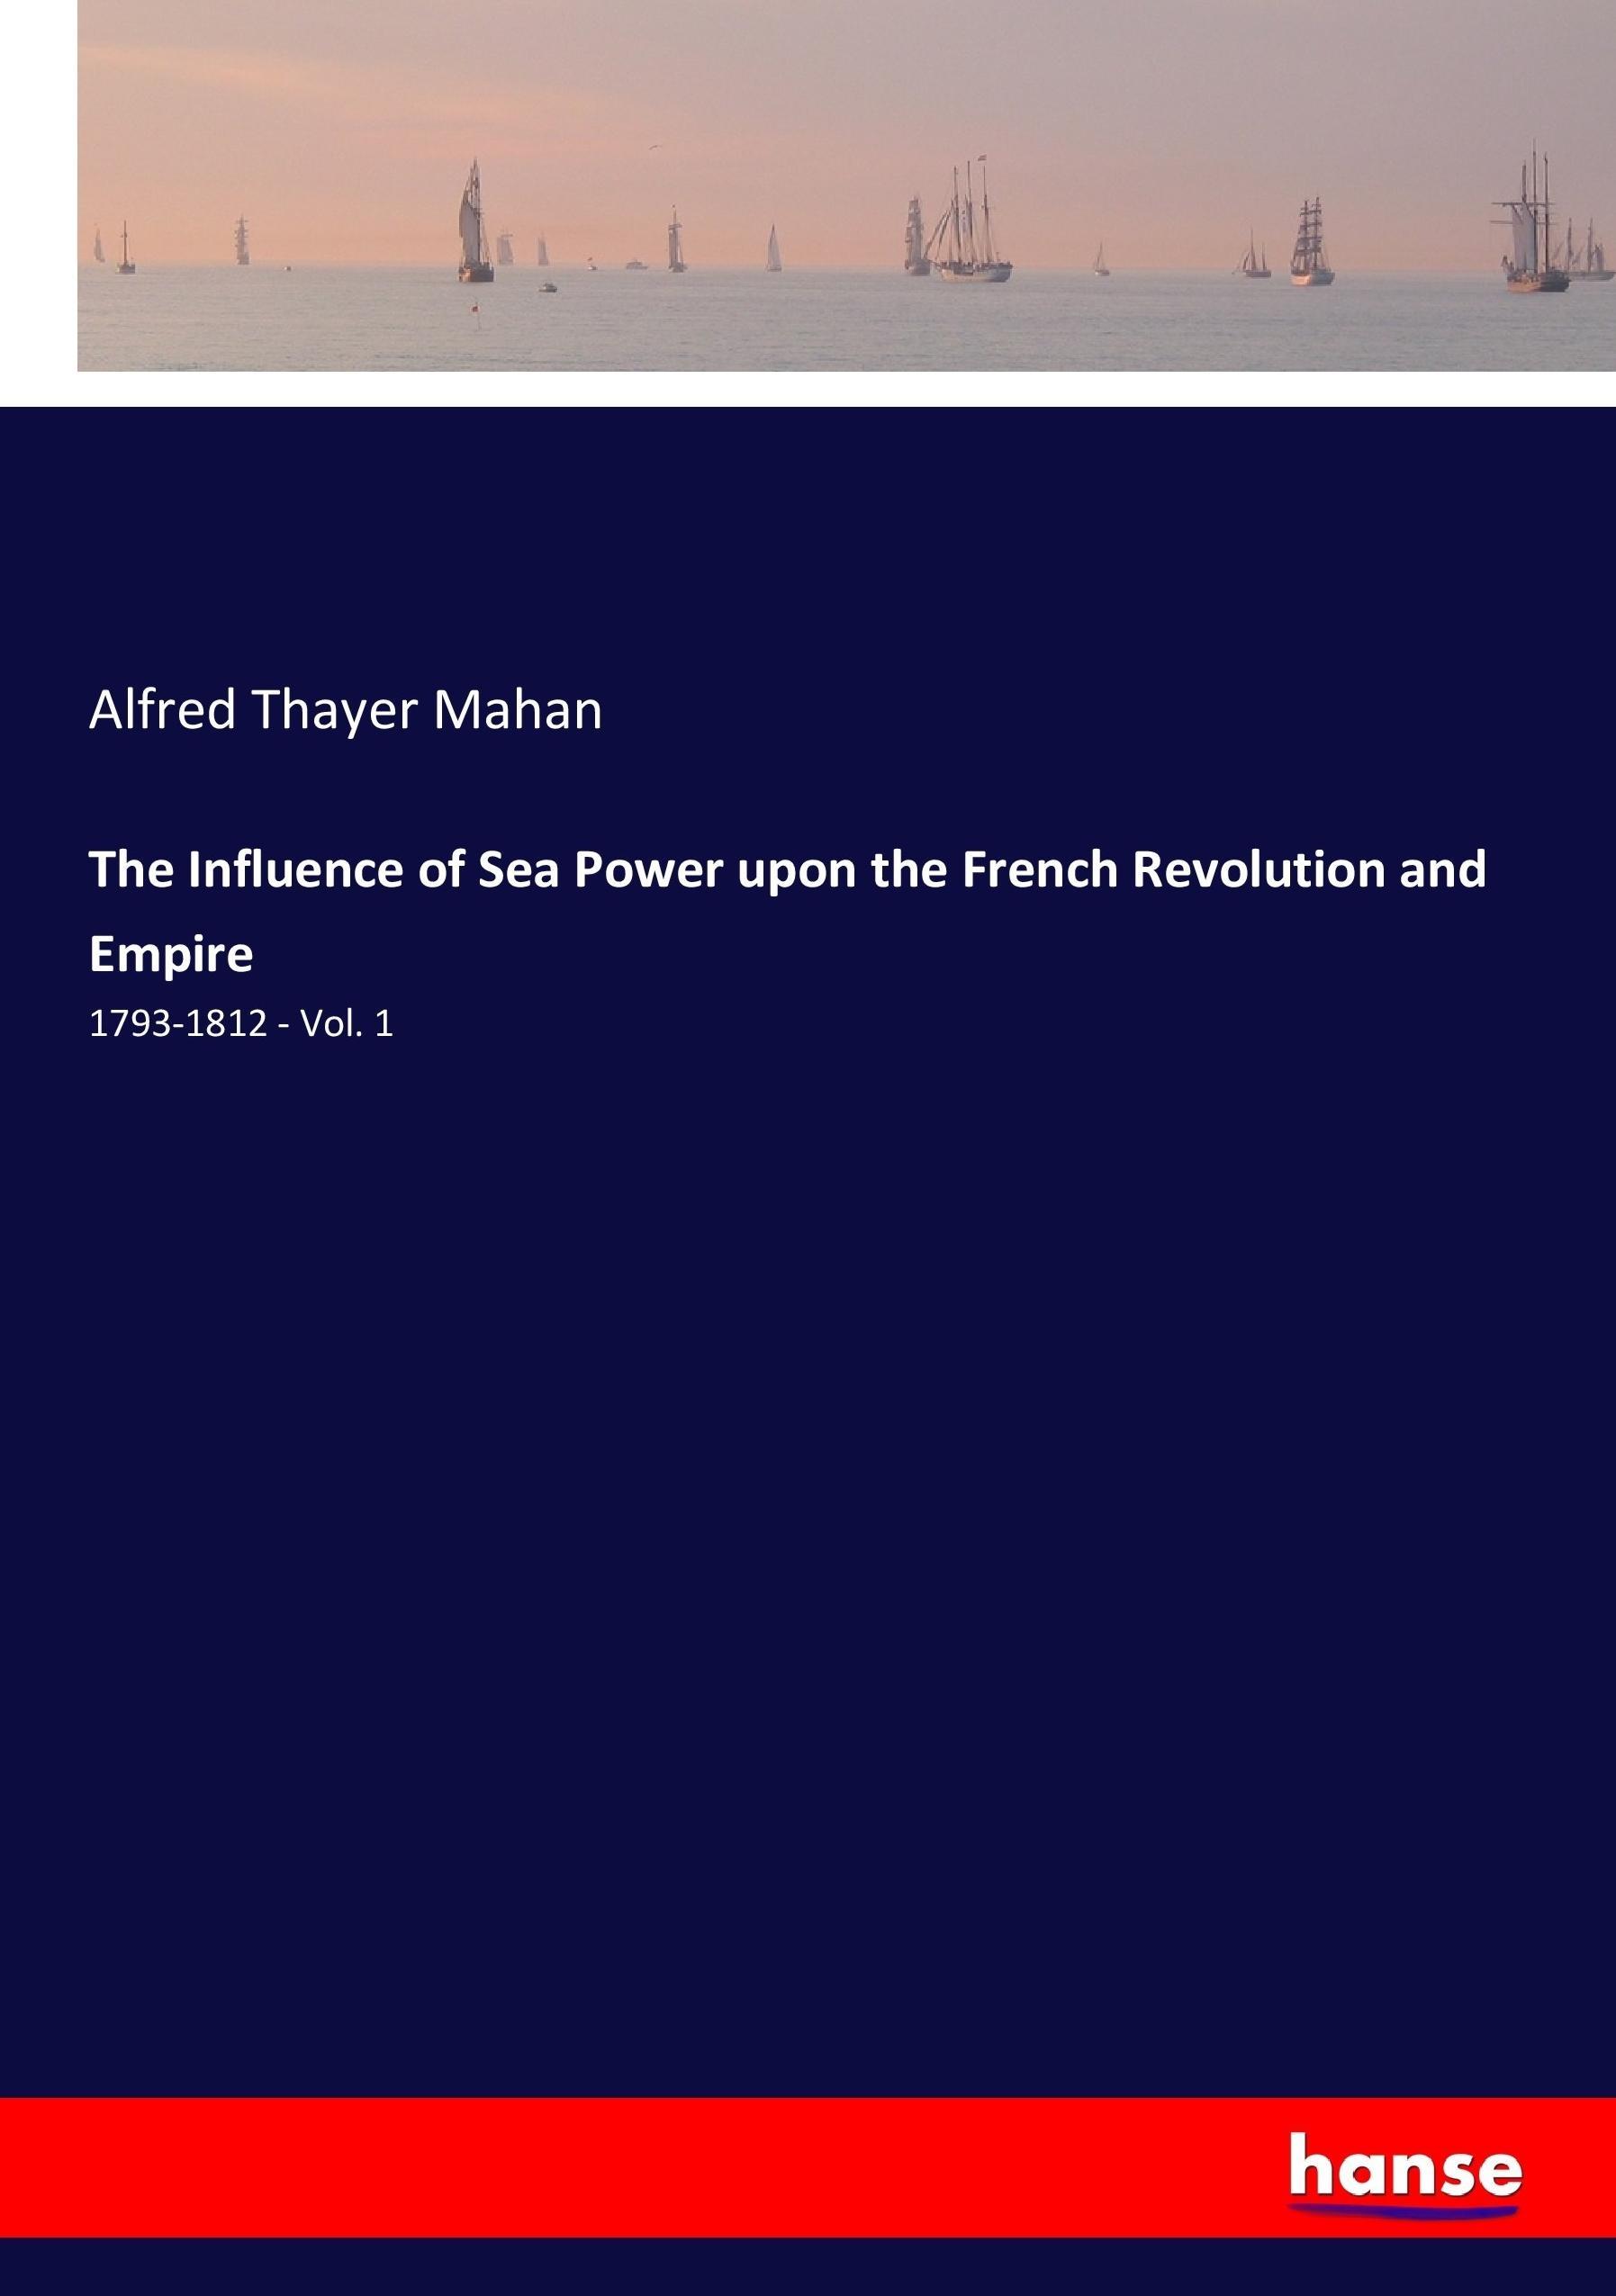 The Influence of Sea Power upon the French Revolution and Empire | 1793-1812 - Vol. 1 | Alfred Thayer Mahan | Taschenbuch | Paperback | 428 S. | Englisch | 2017 | hansebooks | EAN 9783337294847 - Mahan, Alfred Thayer